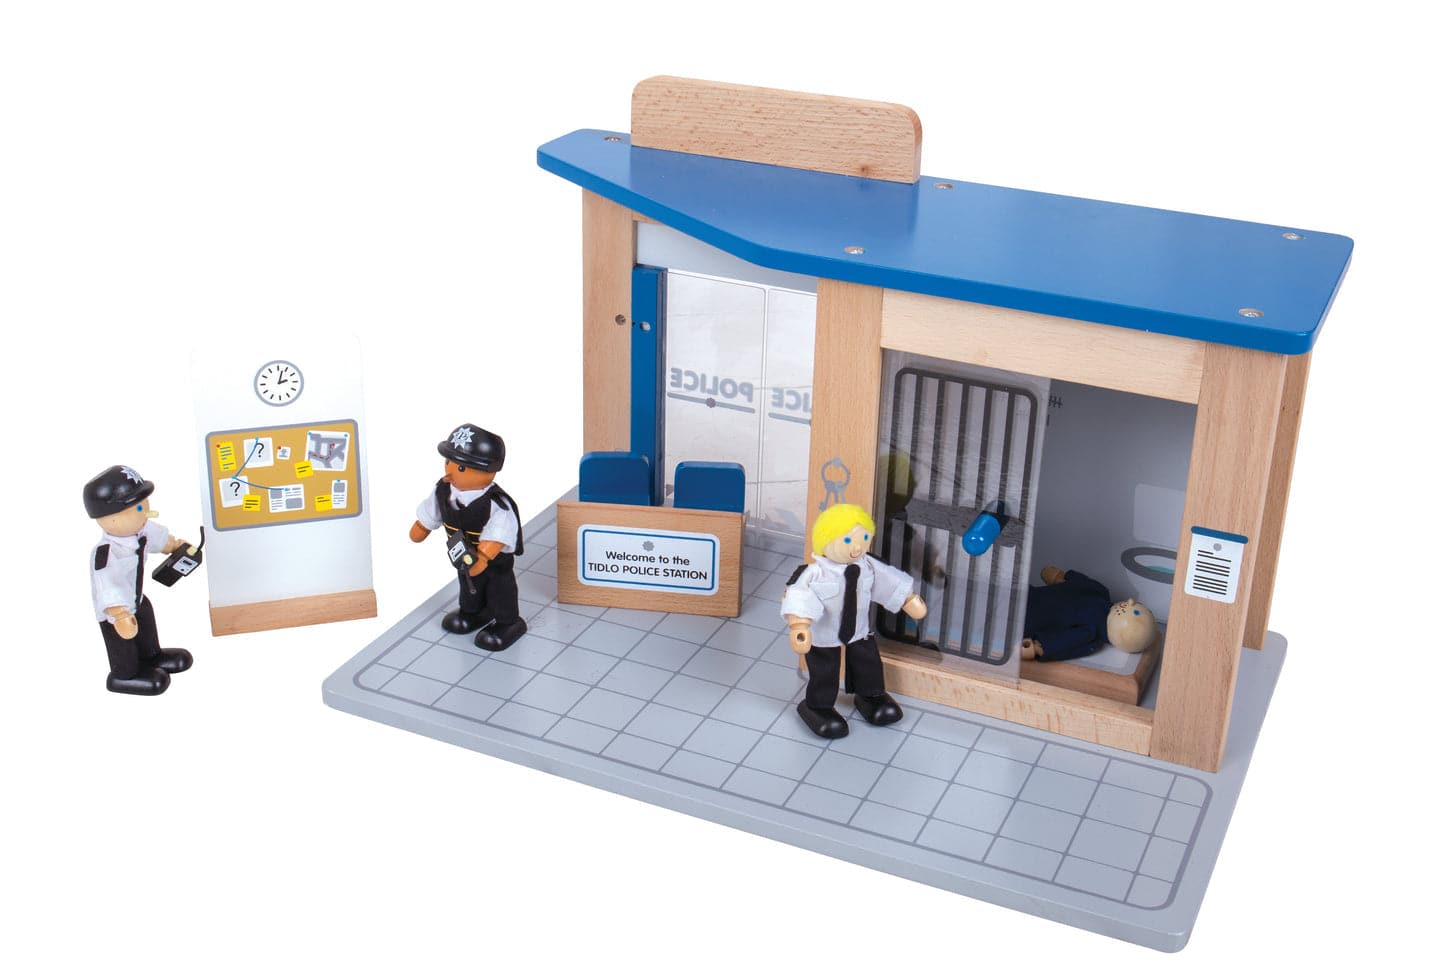 Tidlo Police Station Toy, The Tidlo police have been very busy catching baddies and putting them in jail. Using the suspect board, police have been able to find out who the bad guys are and race around catching them before they get away!This open play wooden Police Station Toy offers endless play scenarios and comes complete with seven accessories, including a reception desk, dispatch desk, 2 chairs, cell beds, a suspect/line-up board and a police bike. Plus, a built-in jail with sliding doors and bar detai